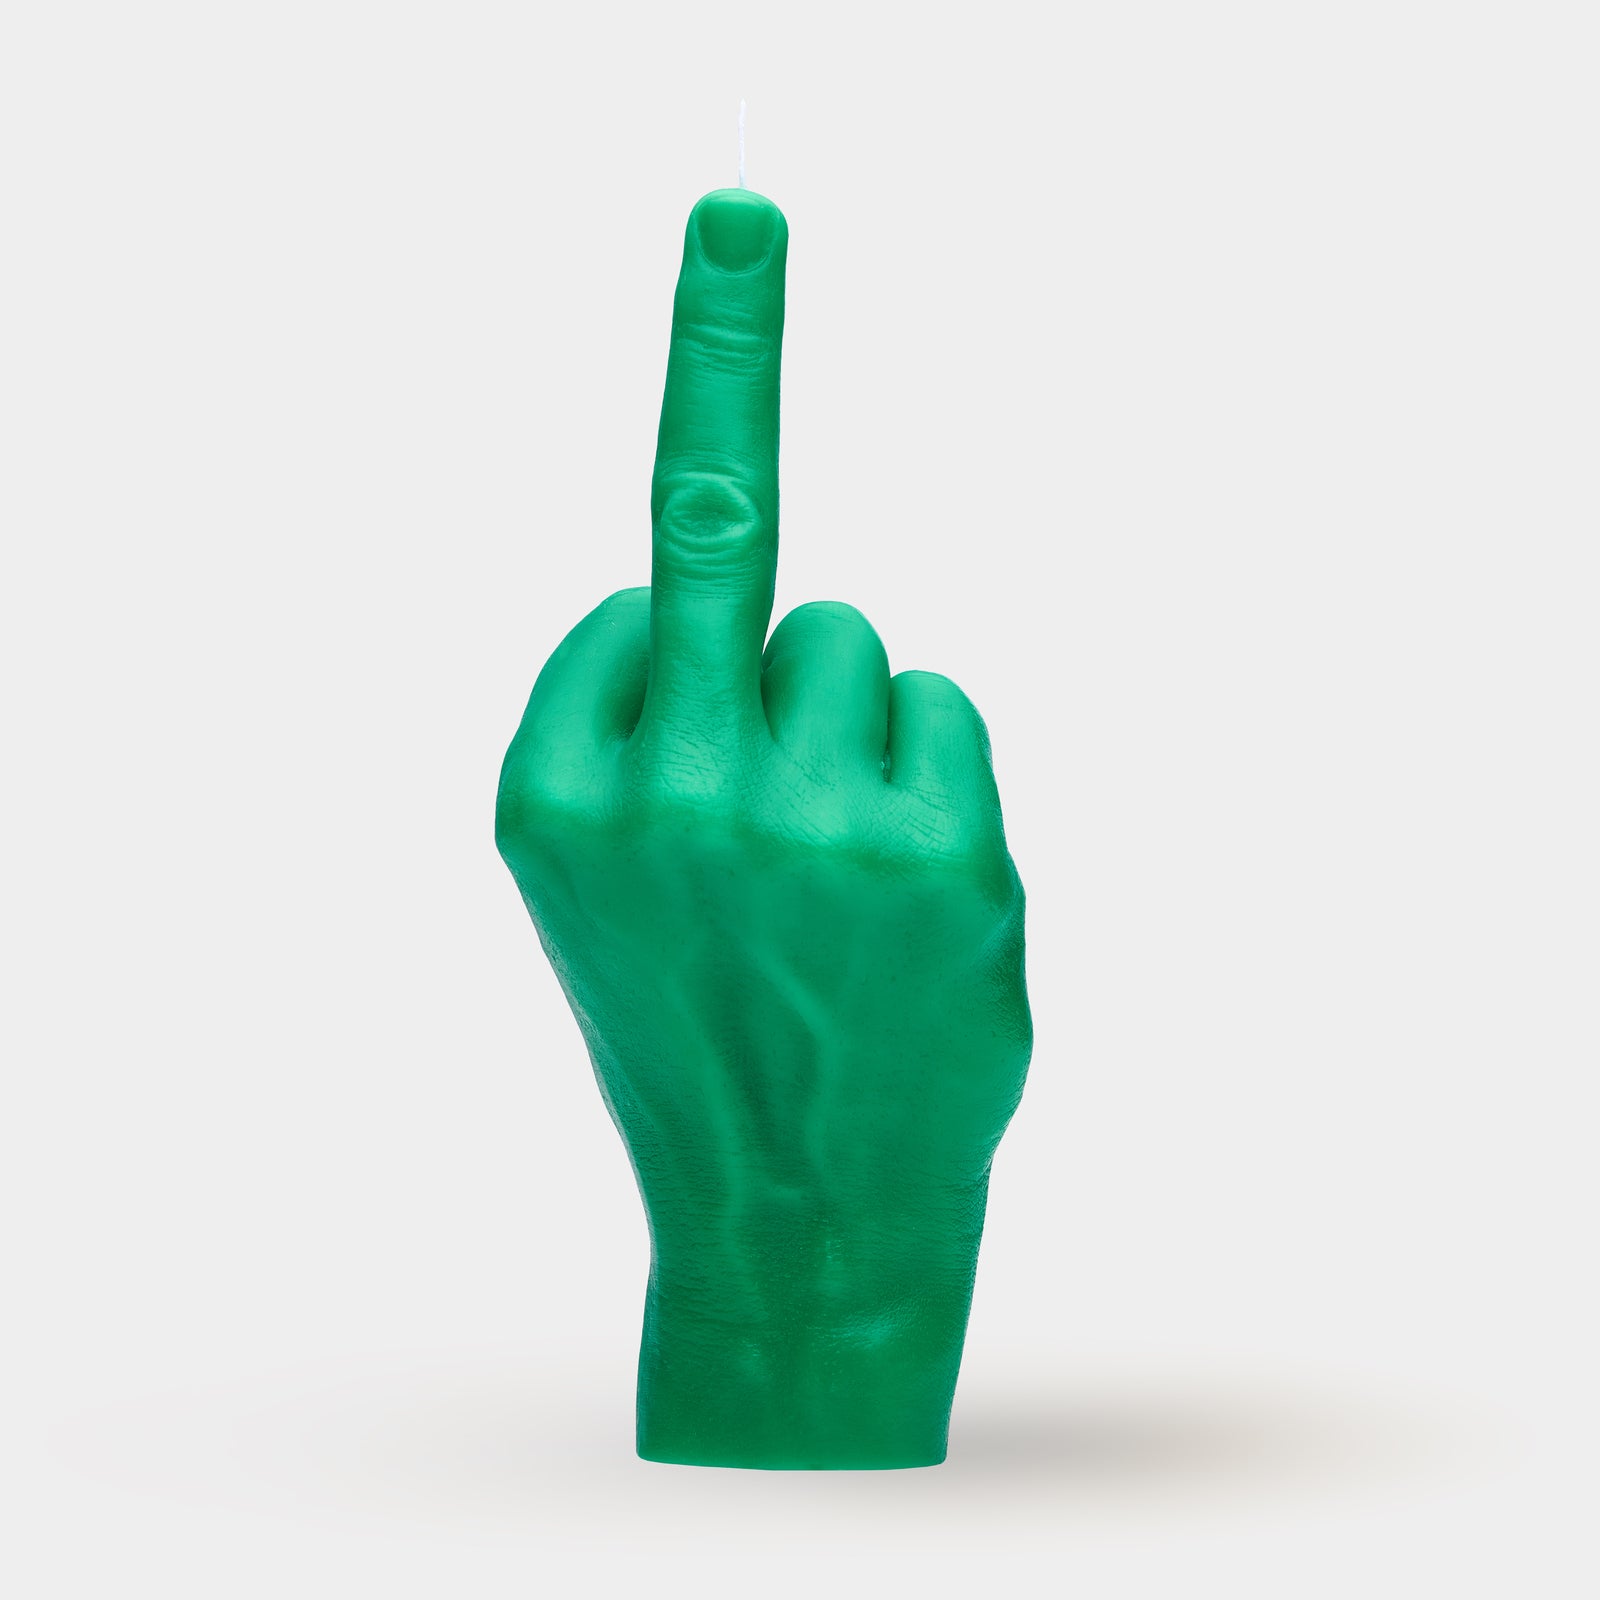 F*CK YOU CANDLE HAND - GREEN